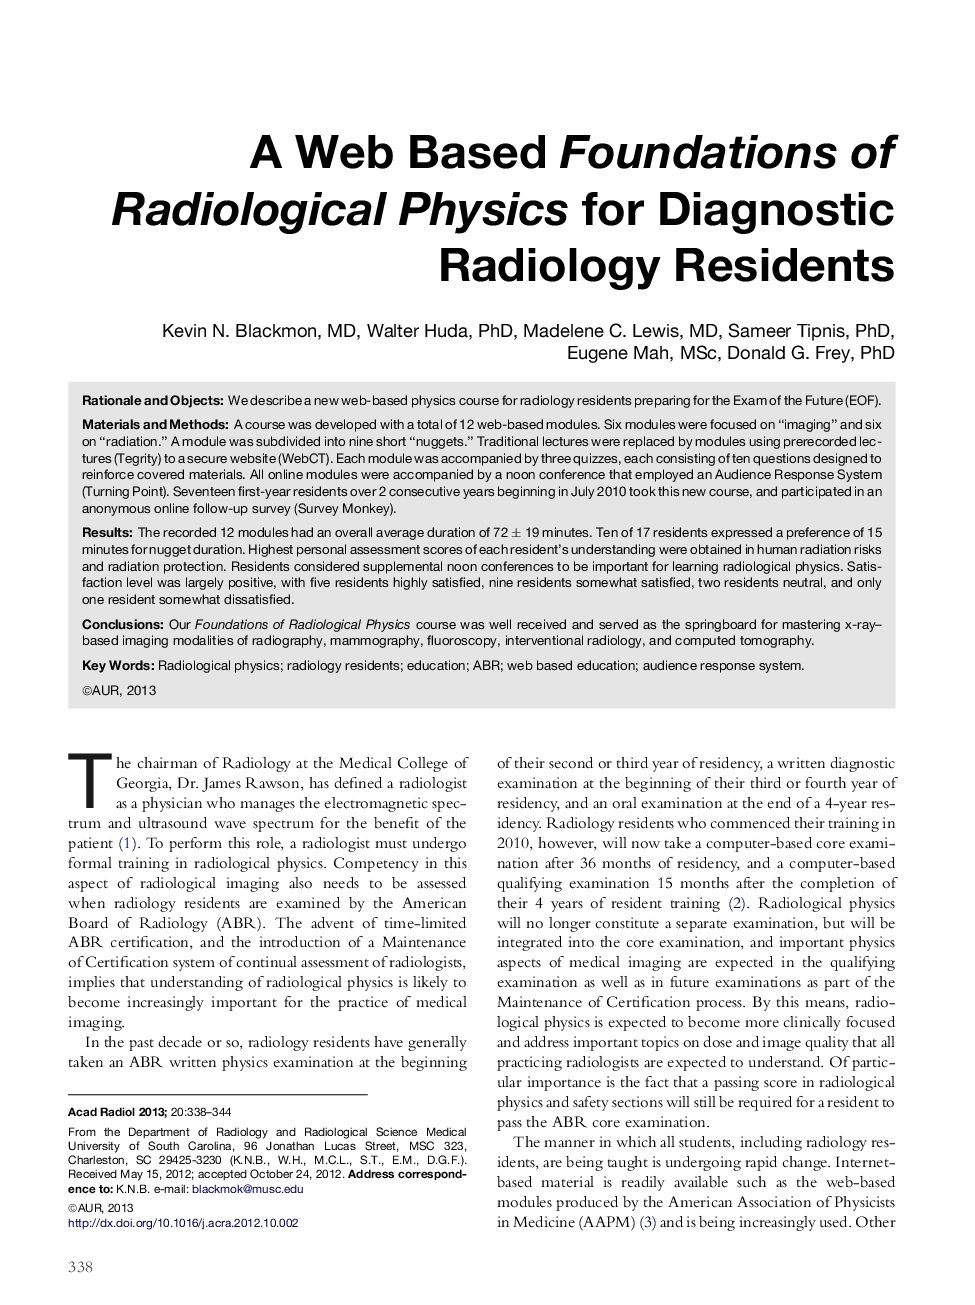 A Web Based Foundations of Radiological Physics for Diagnostic Radiology Residents